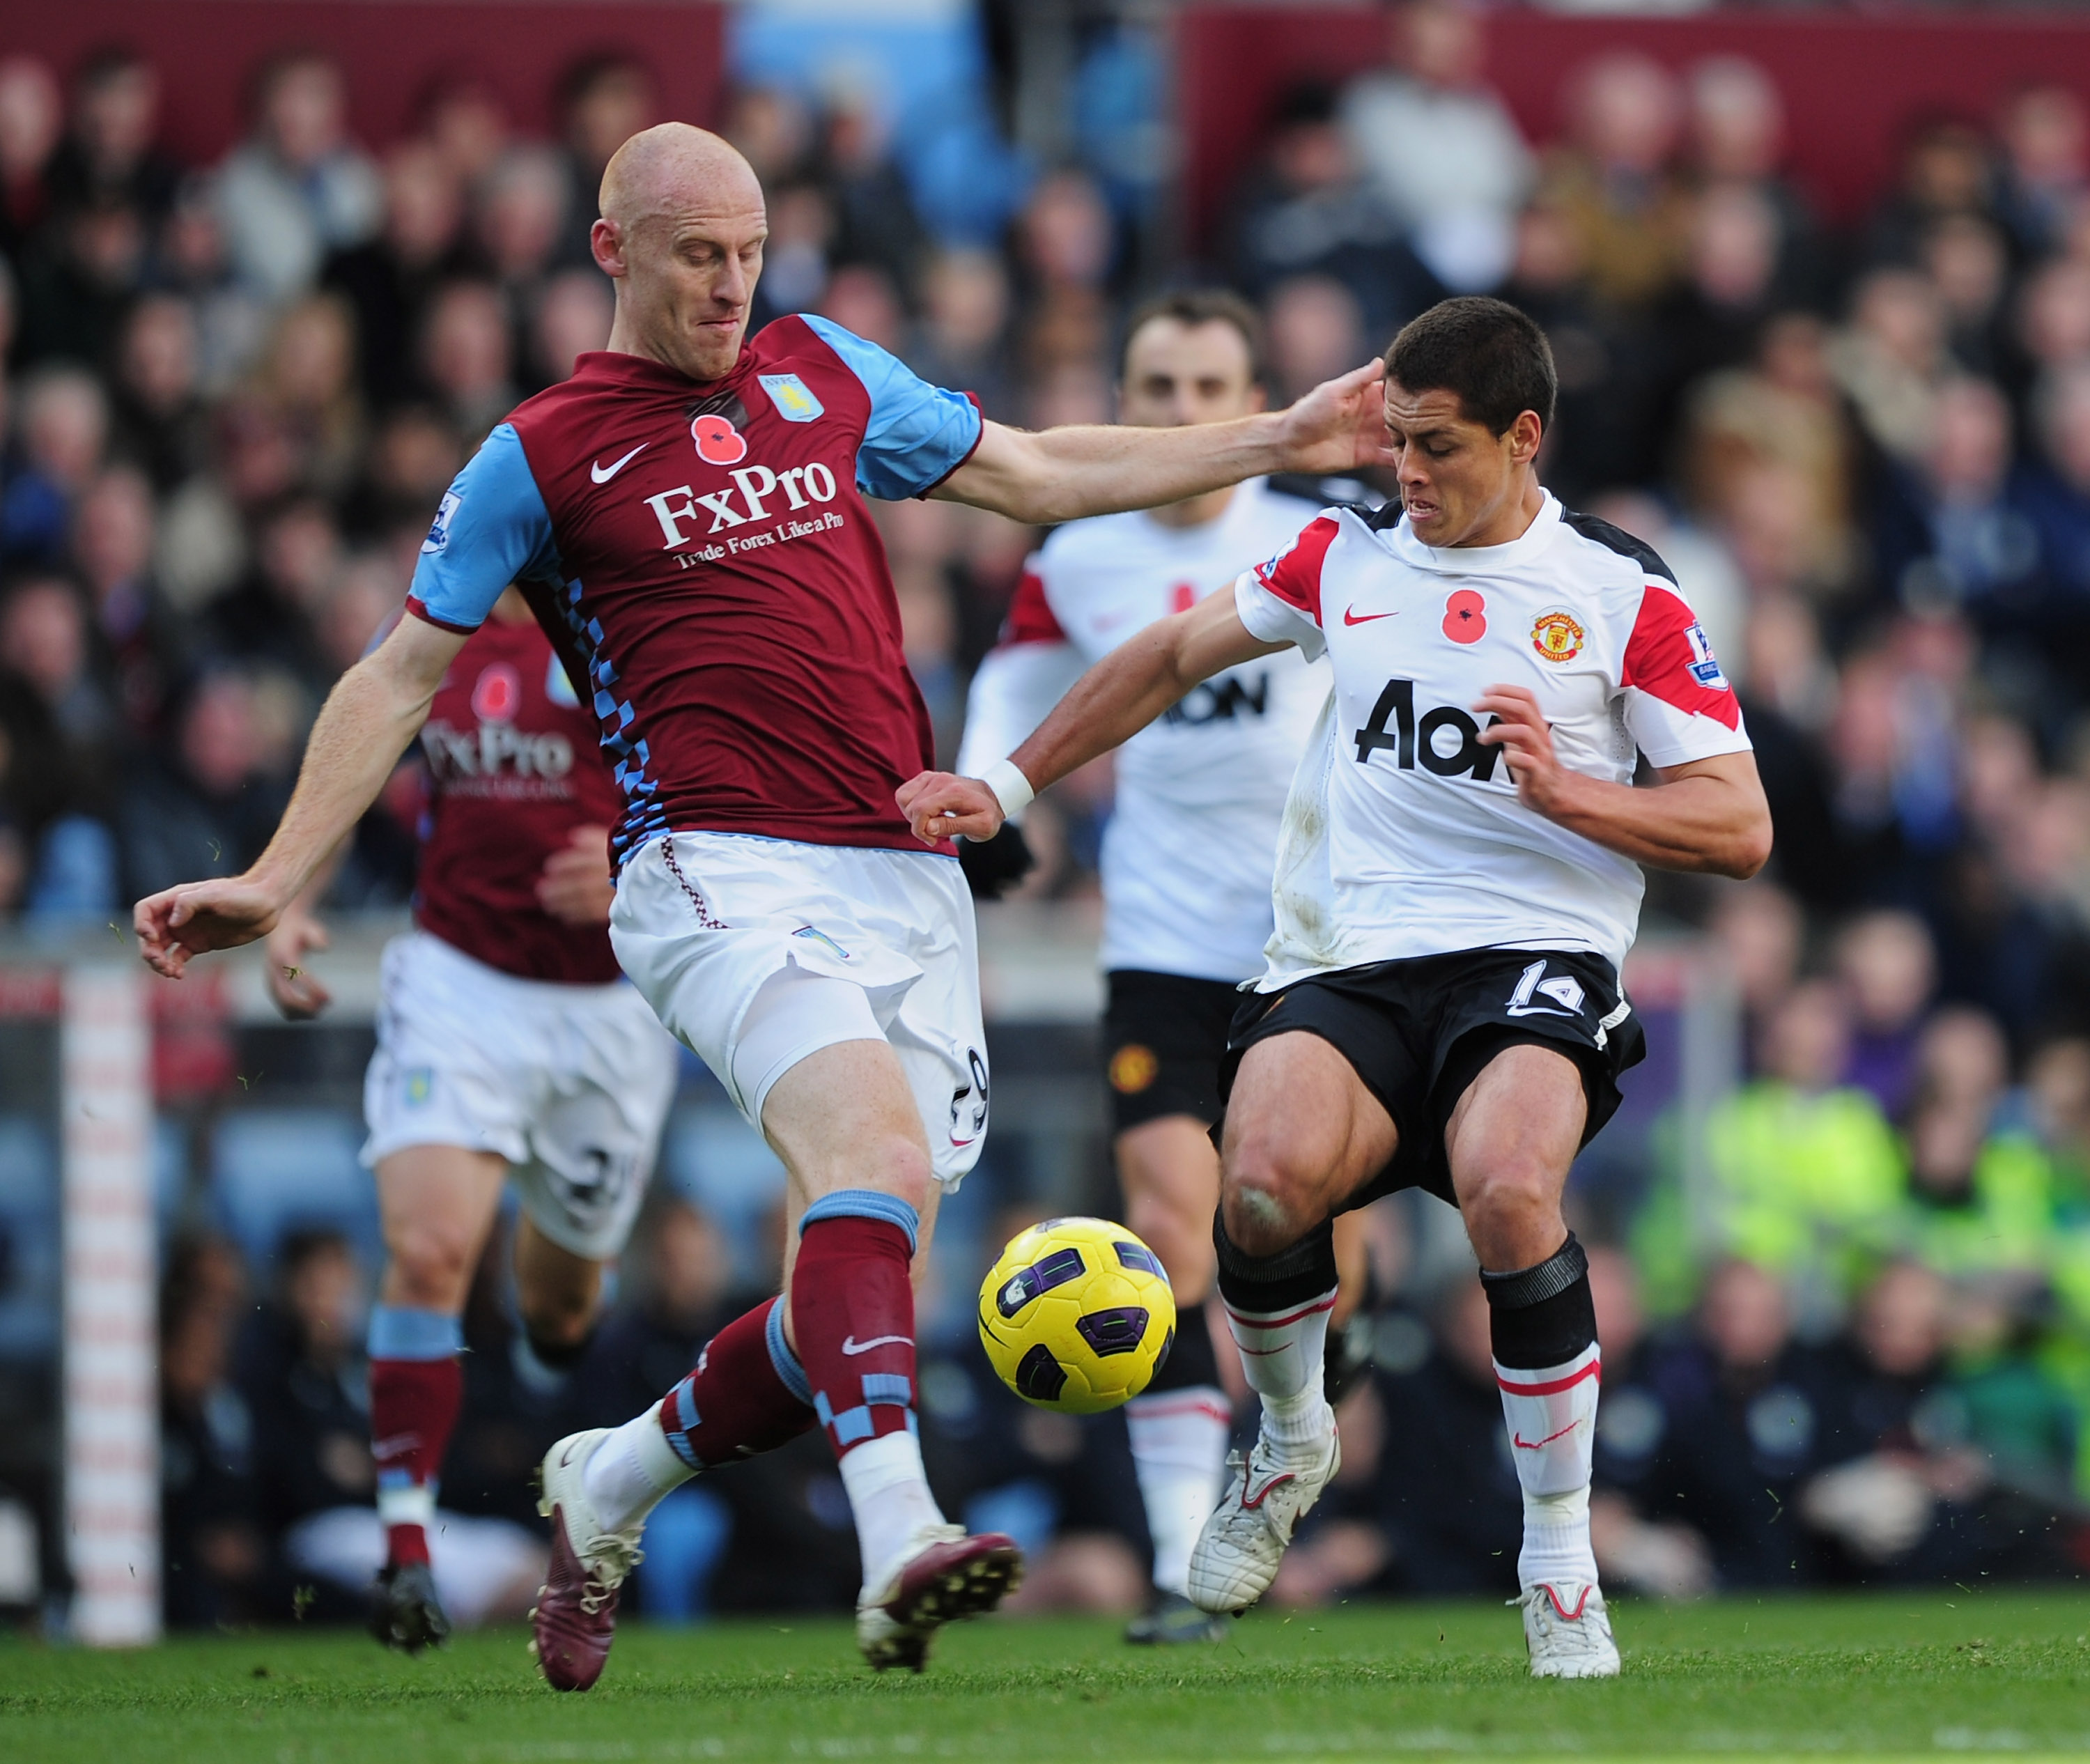 BIRMINGHAM, ENGLAND - NOVEMBER 13:  Javier Hernandez of Manchester United is challenged by James Collins of Aston Villa during the Barclays Premier League match between Aston Villa and Manchester United at Villa Park on November 13, 2010 in Birmingham, En